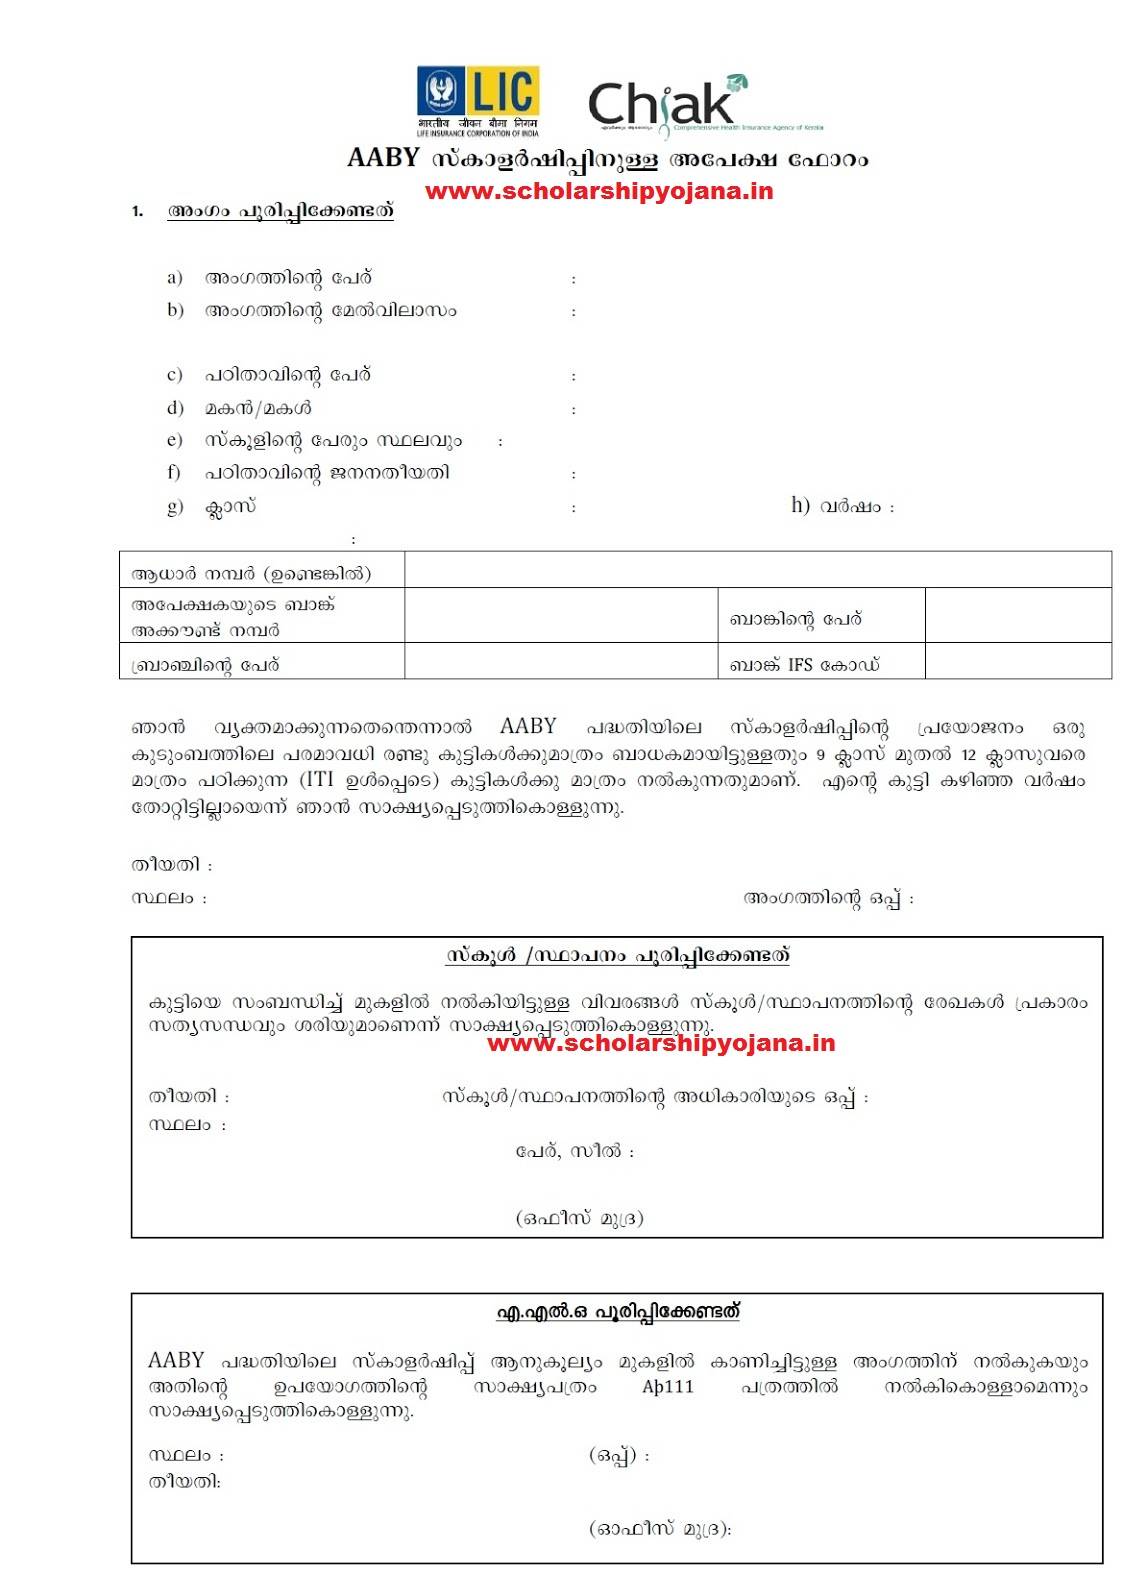 AABY Scholarship Application Form